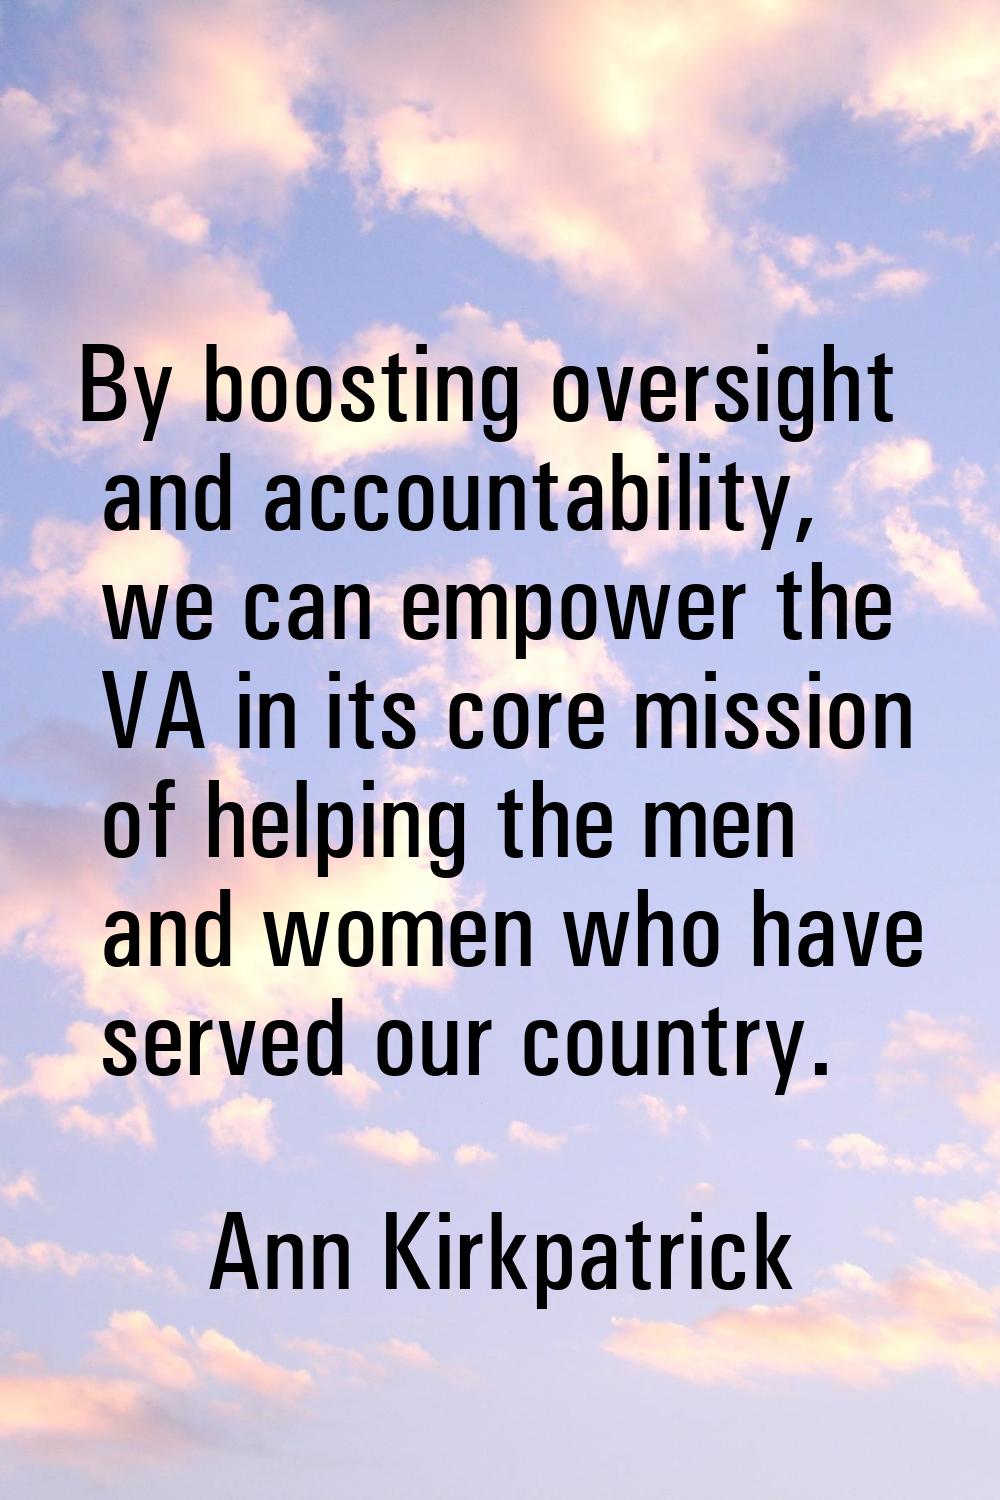 By boosting oversight and accountability, we can empower the VA in its core mission of helping the 